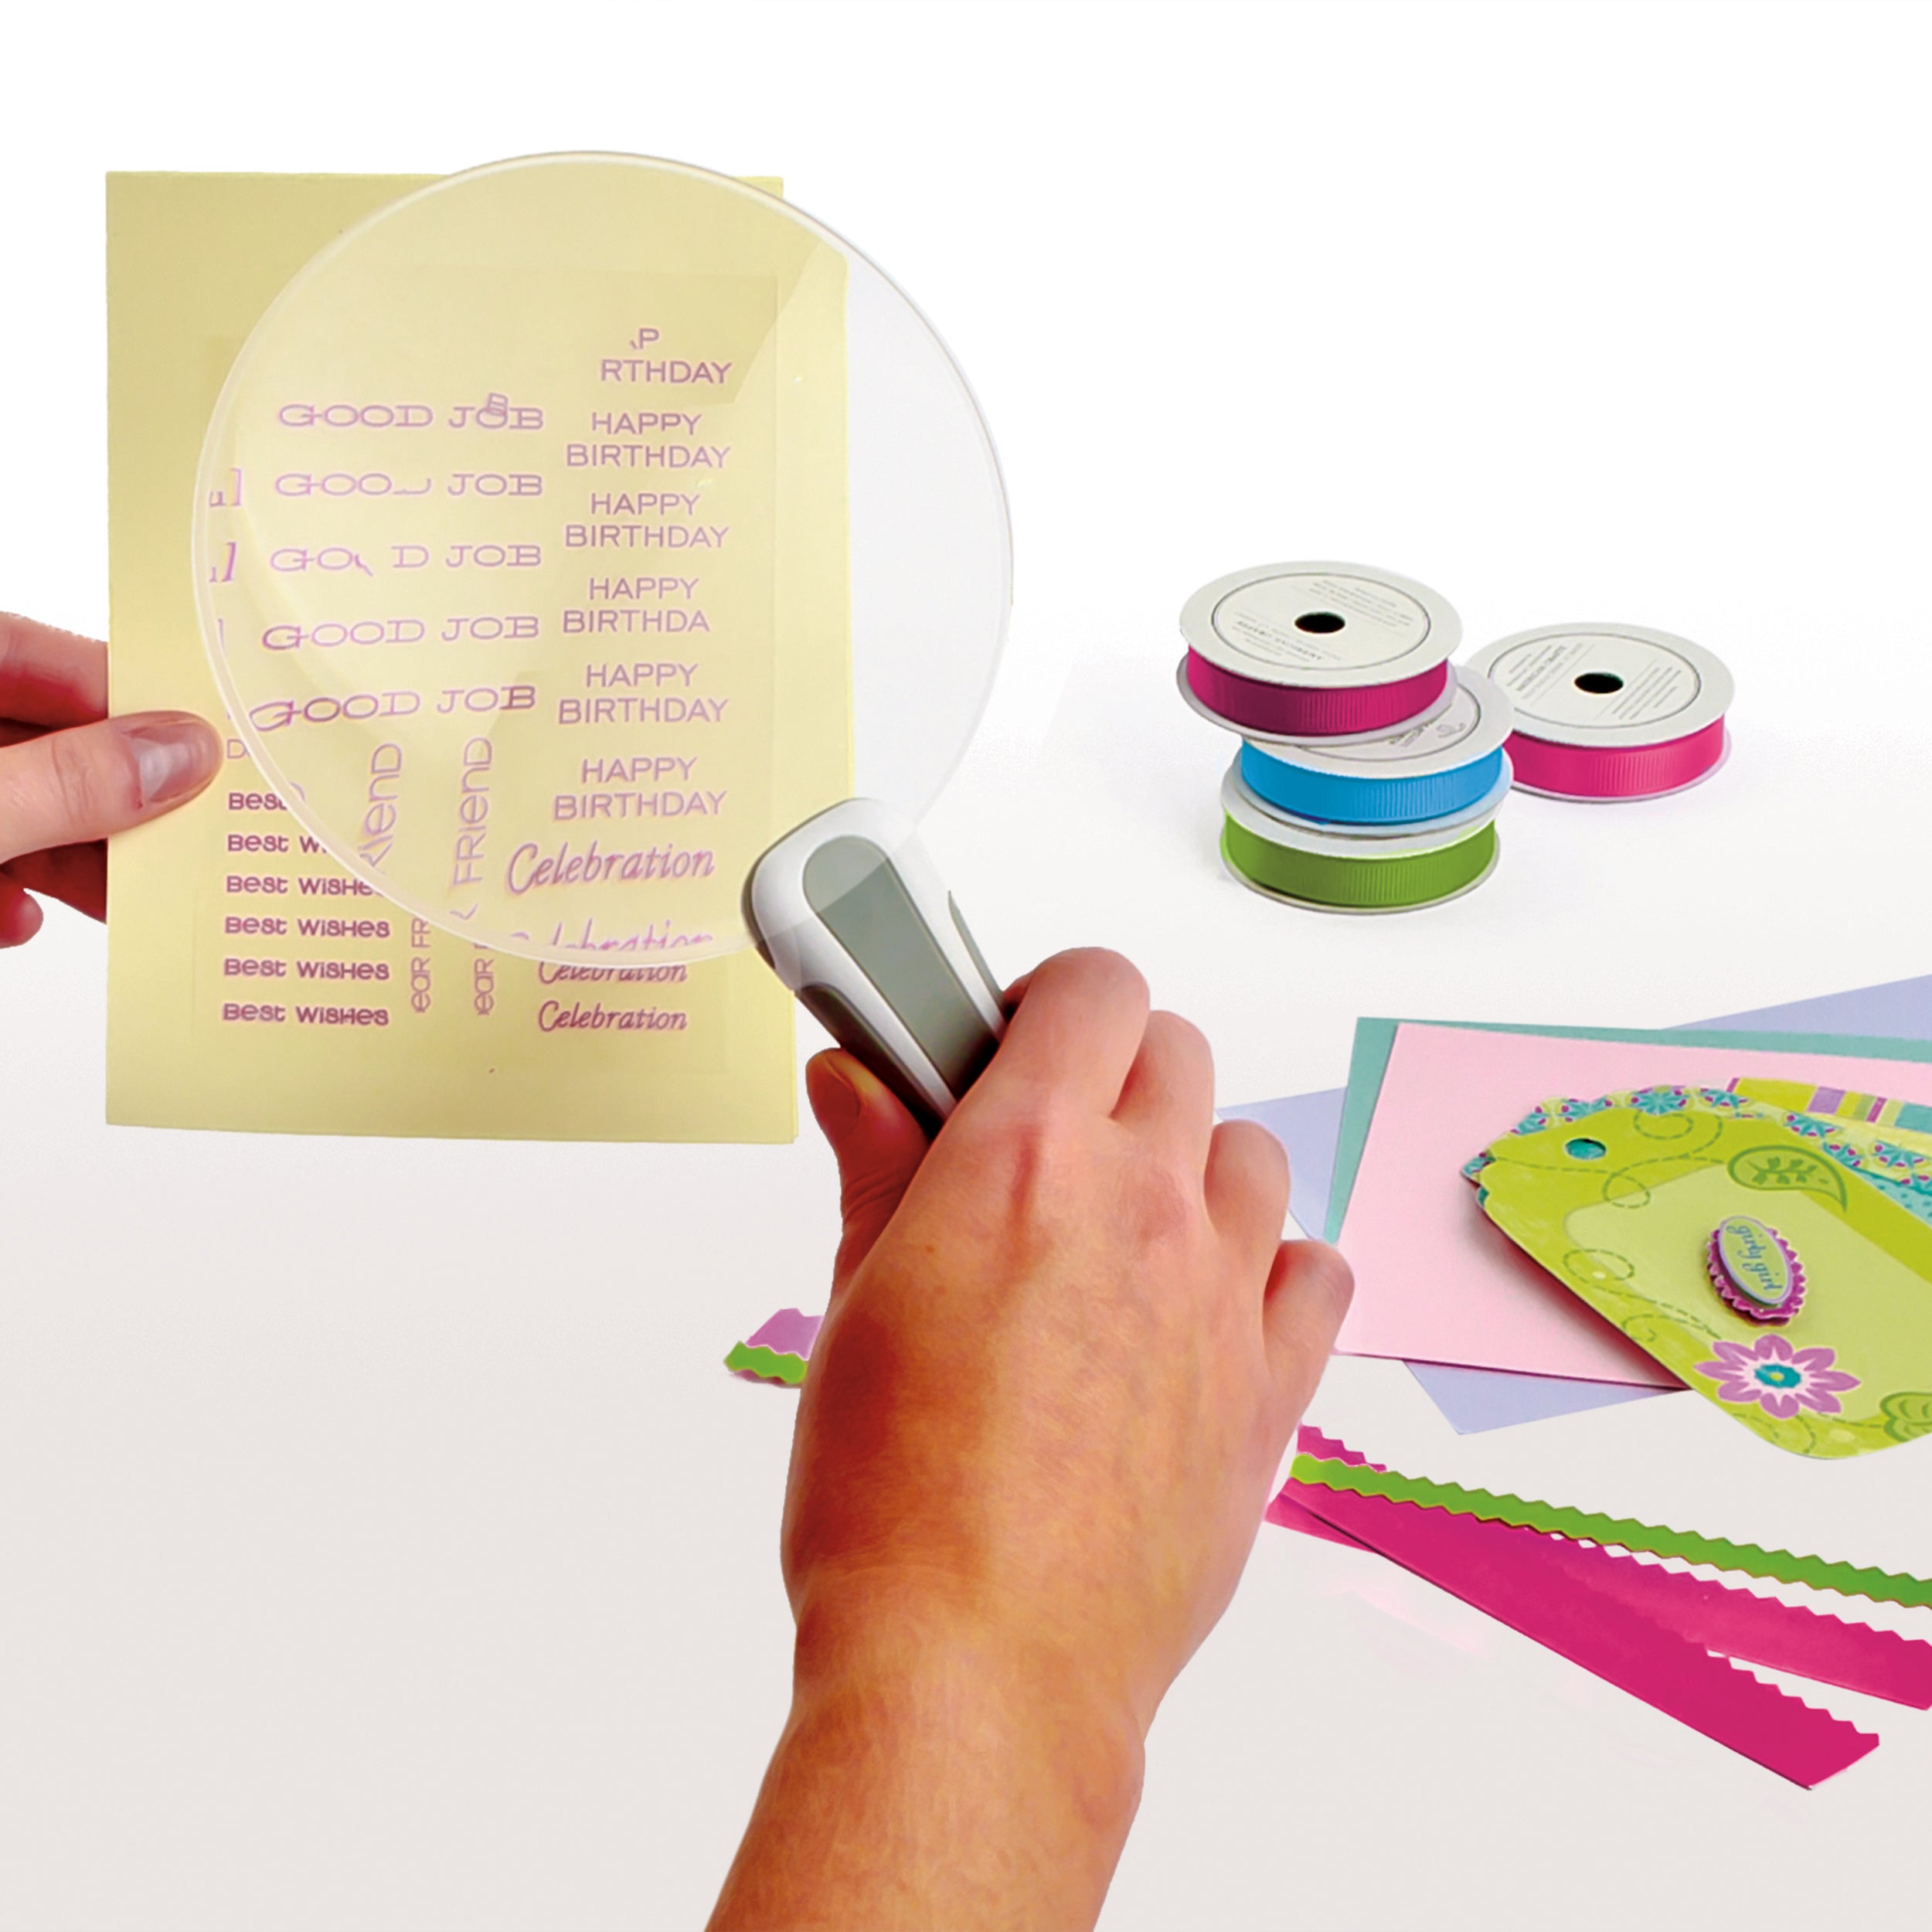 5-Inch Rimless LED Handheld Magnifier